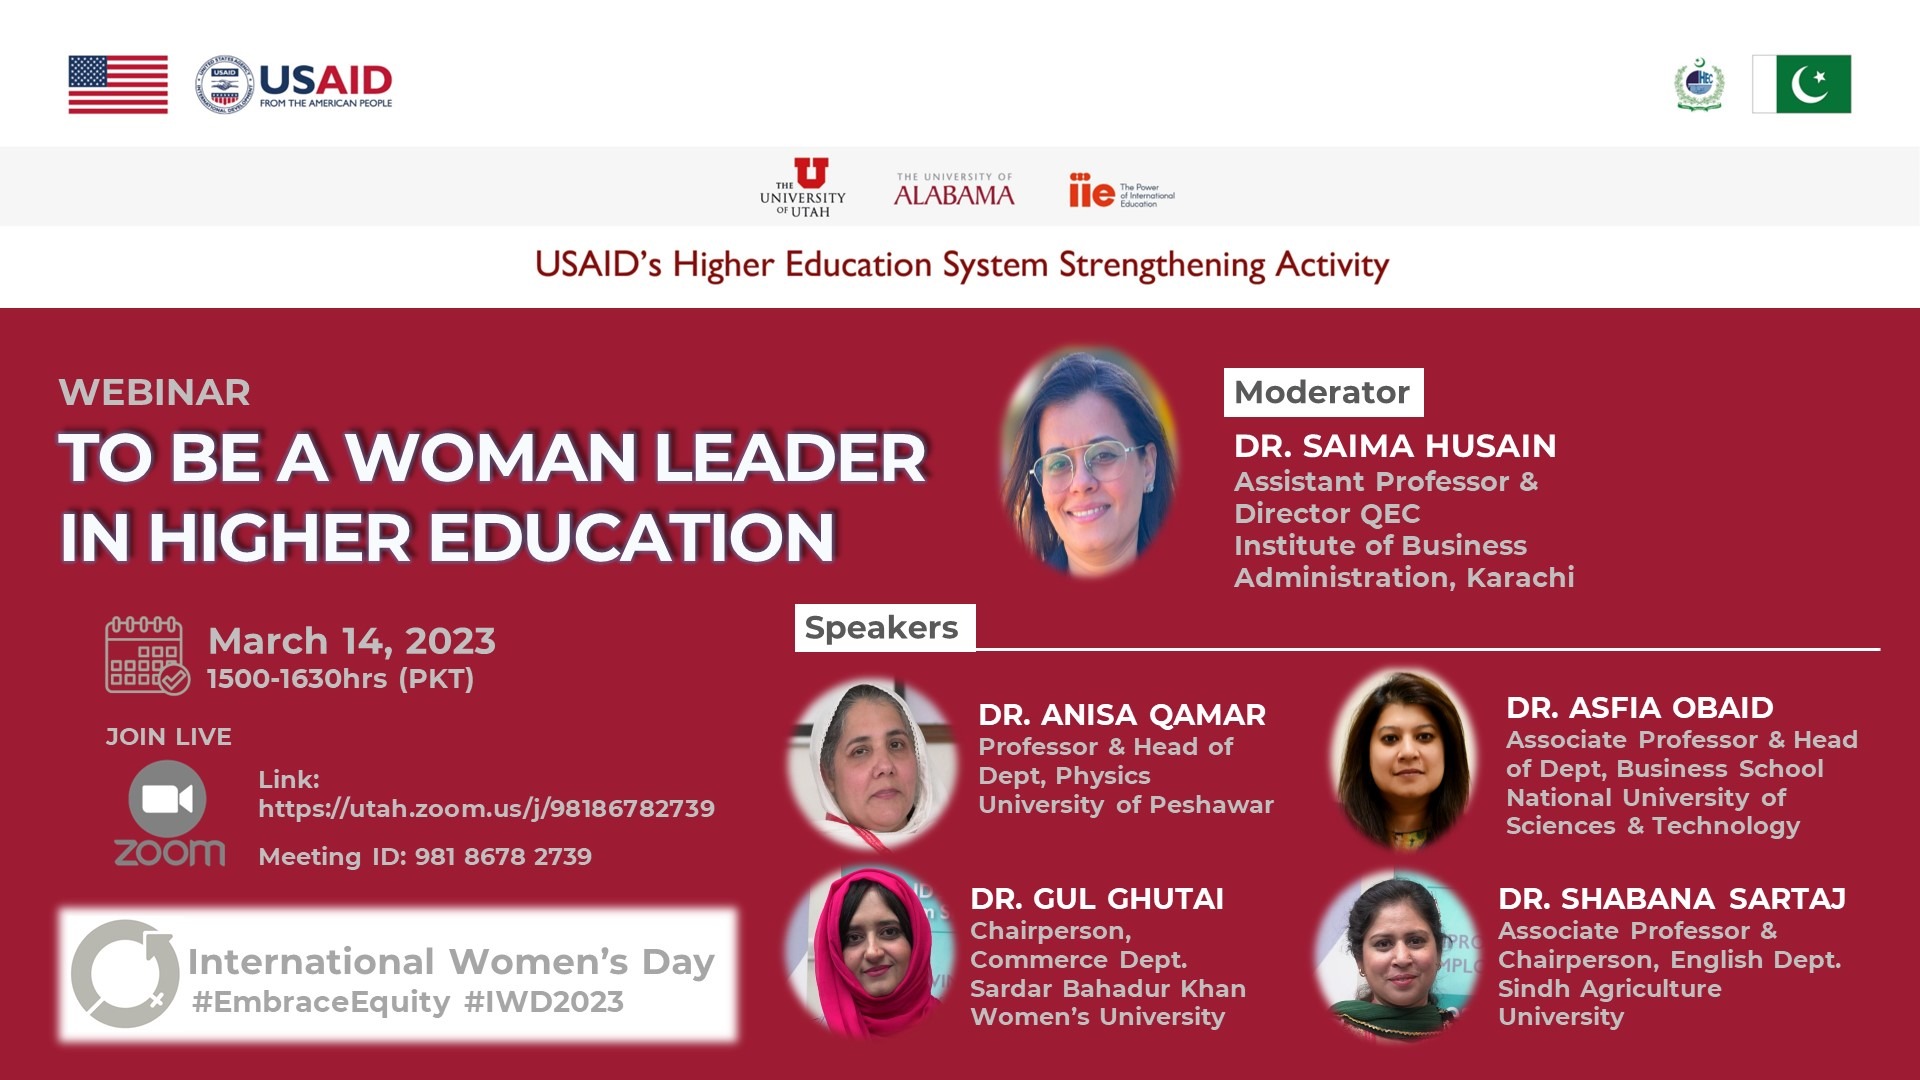 Webinar: To Be a Woman Leader in Higher Education